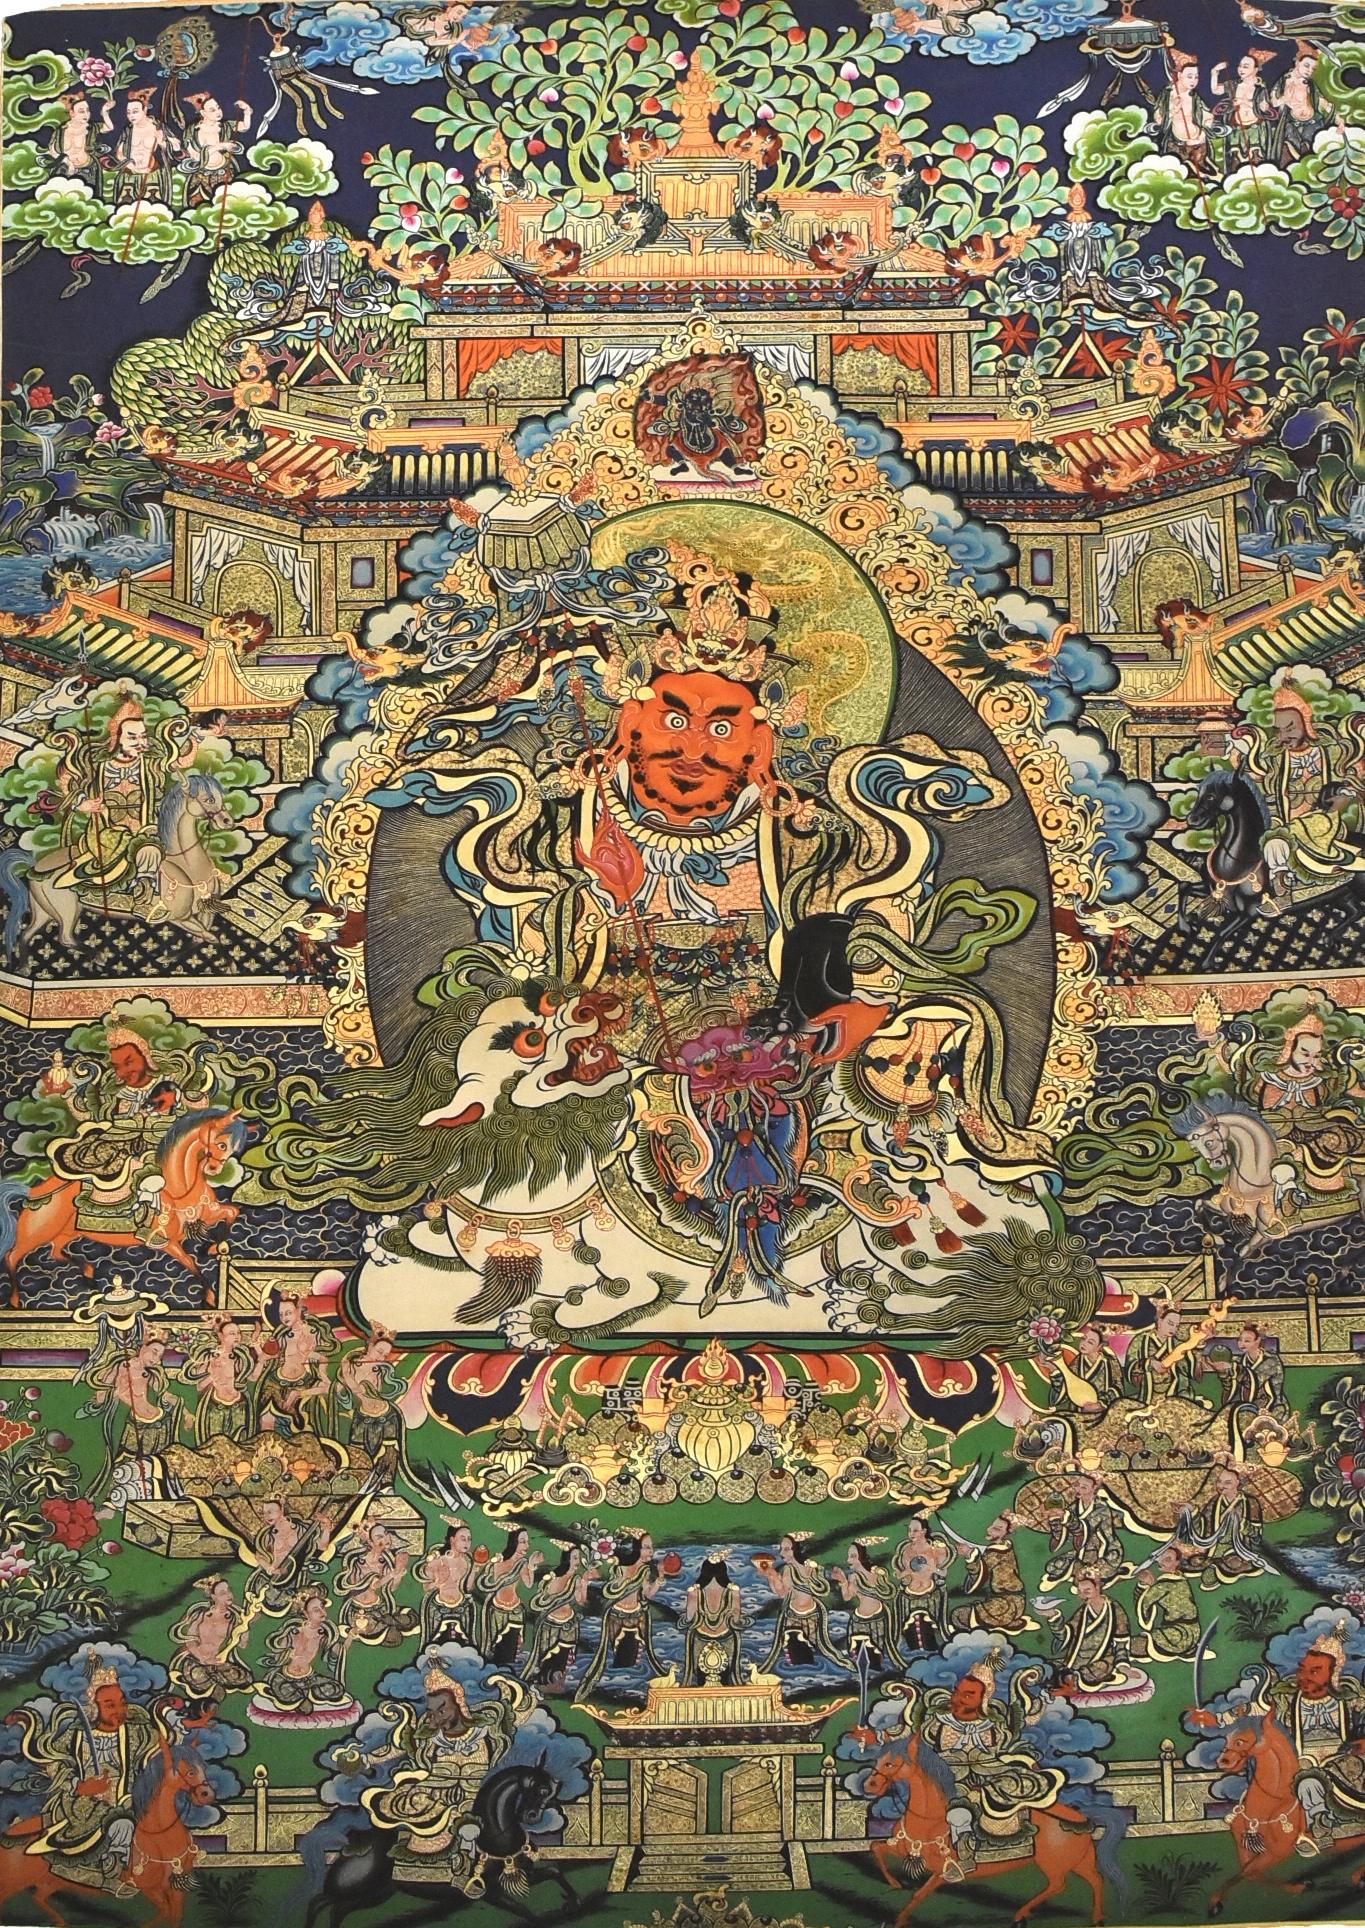 Absolutely stunning Thangka painstakingly painted by Tibetan artists. This piece depicts the protection god Dorje Drolo whose ferocious expression subdues negative and demonic forces. This painting is very full with splendid colors and vivid